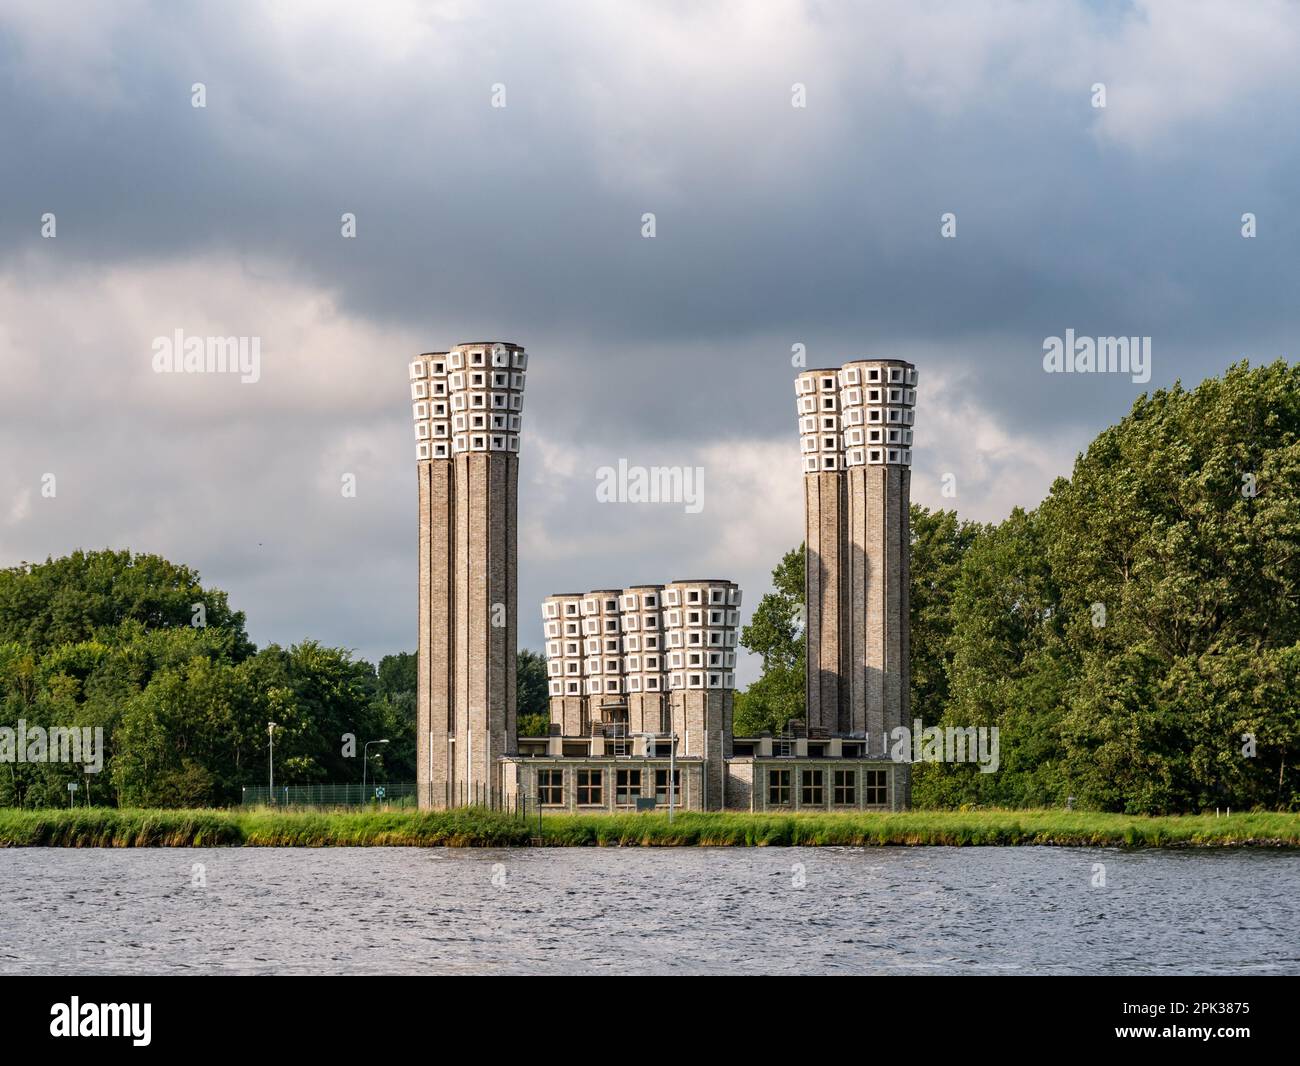 North bank ventilation building with shafts of road tunnel Velsertunnel, North Sea Canal, Velsen-Noord, Netherlands Stock Photo